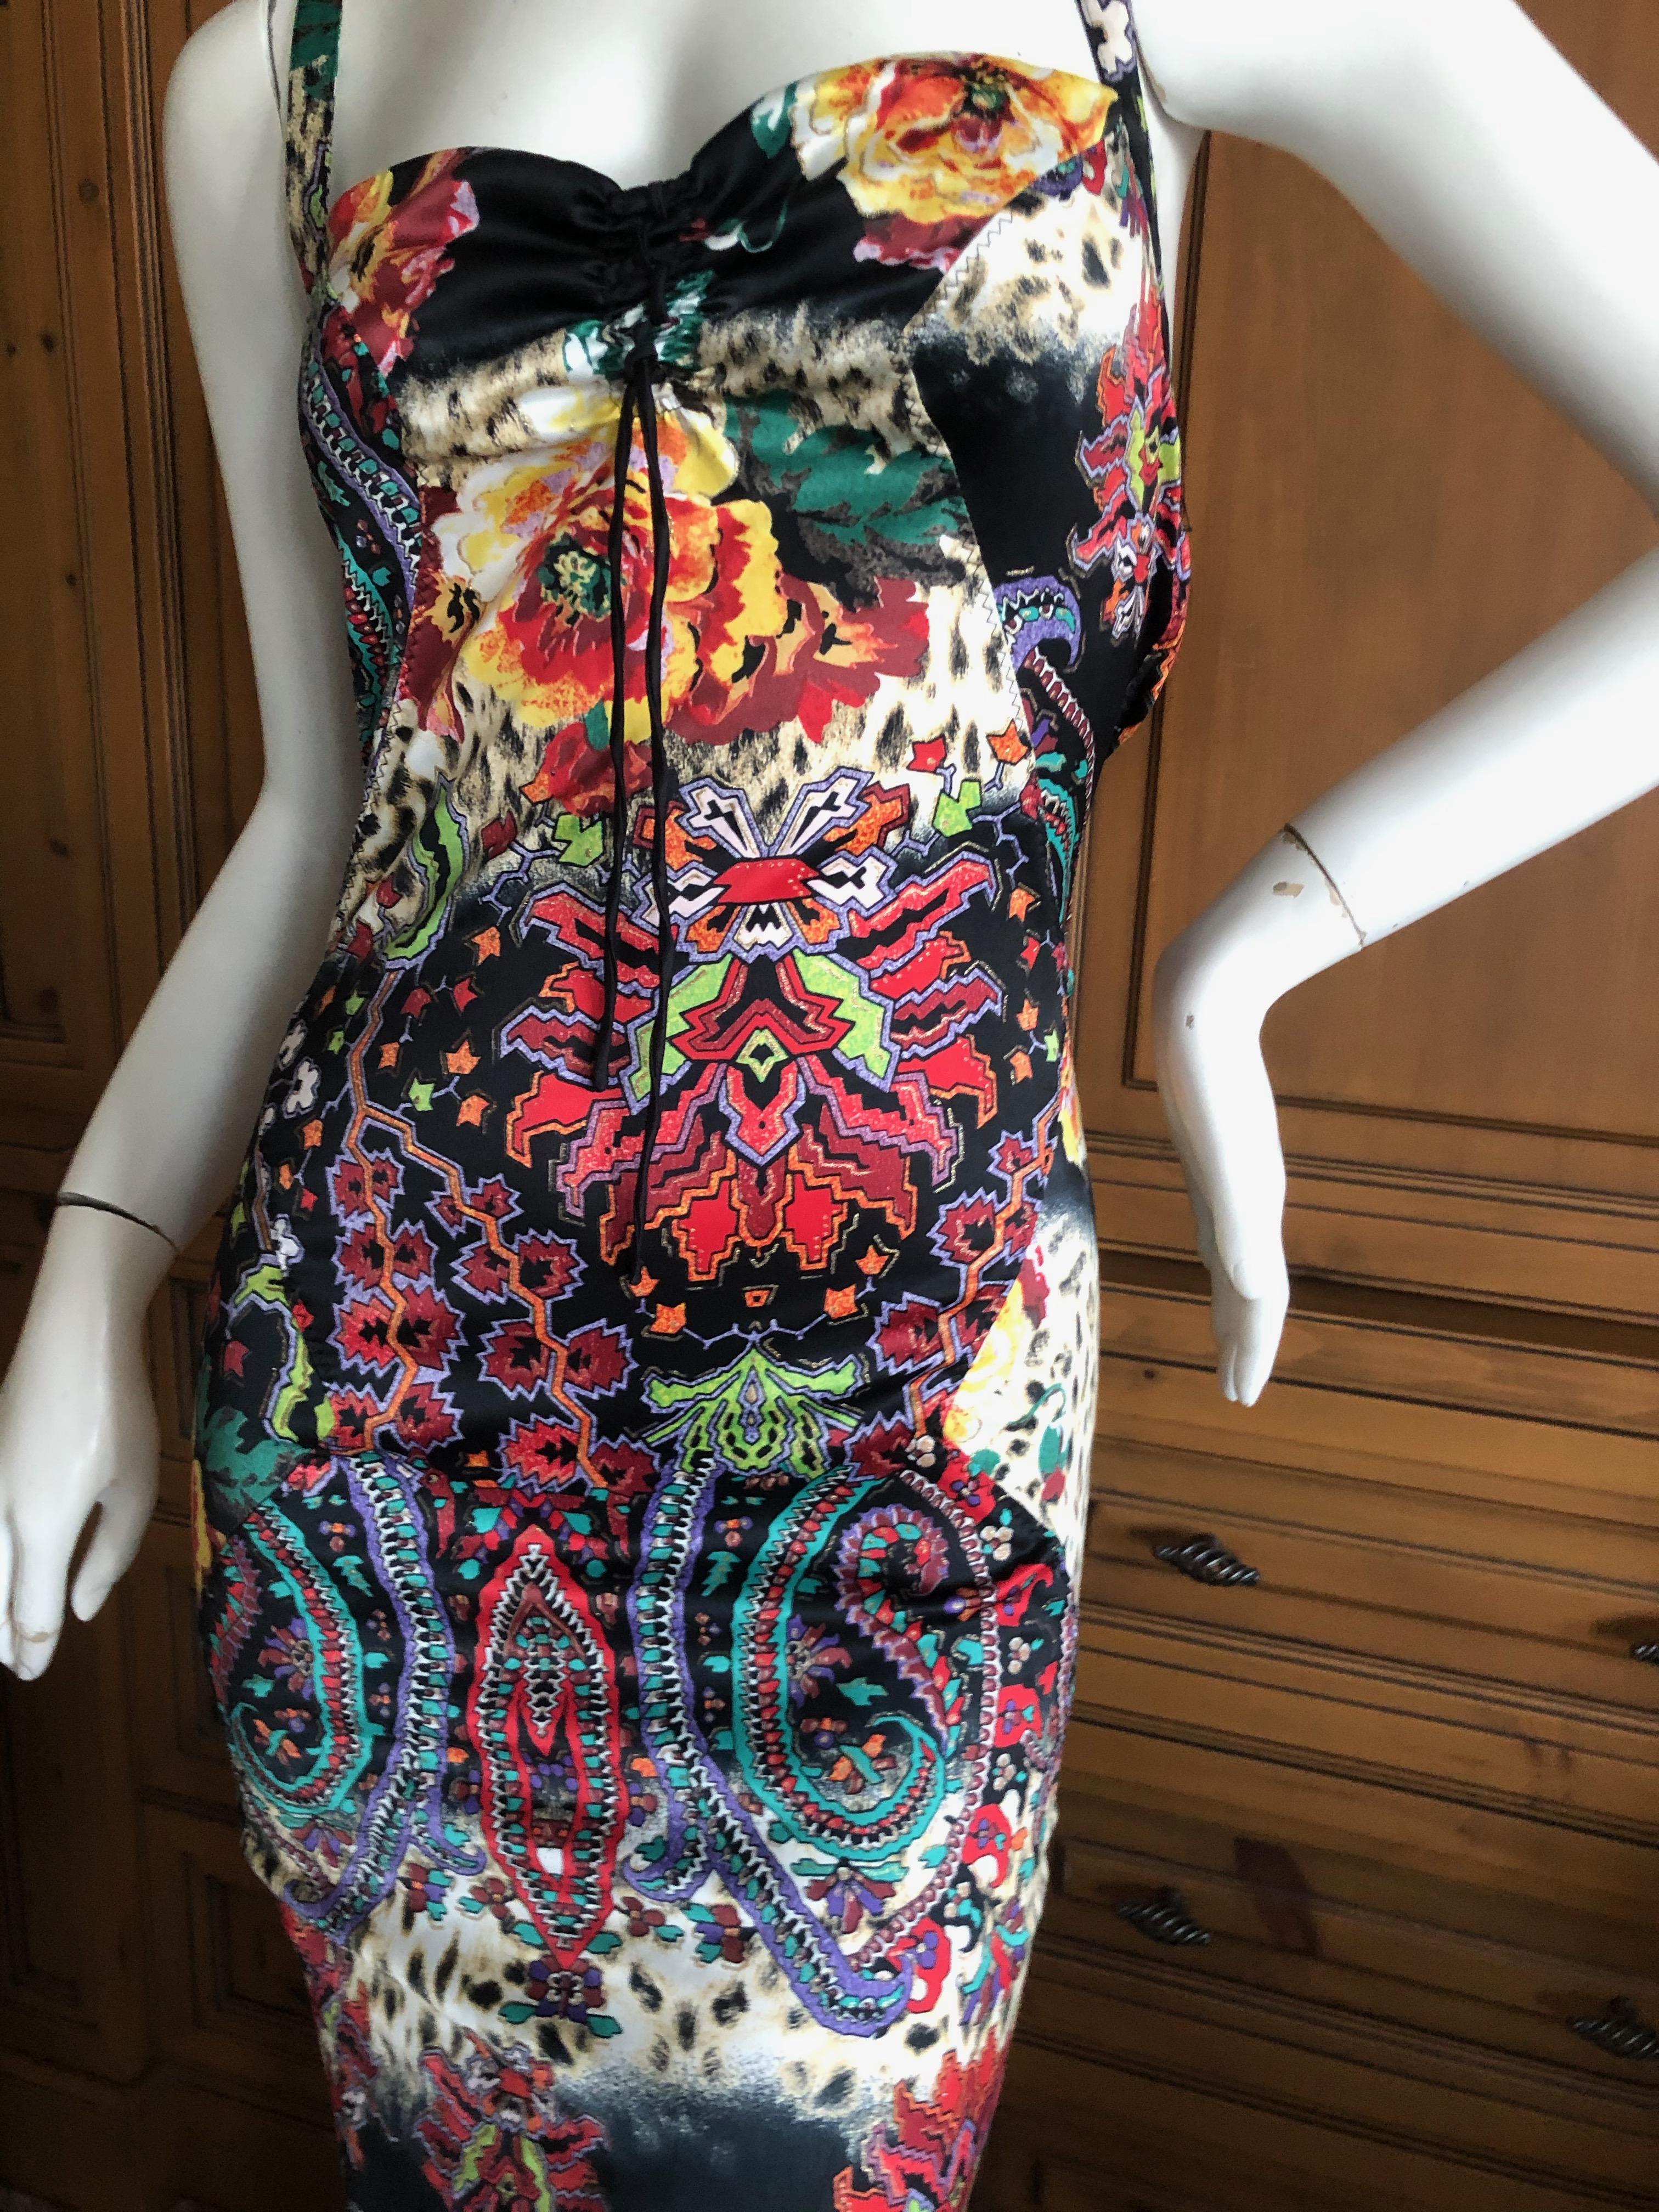 Roberto Cavalli Just Cavalli Fishtail Mermaid Racer Back Evening Dress Size 46 In Excellent Condition For Sale In Cloverdale, CA